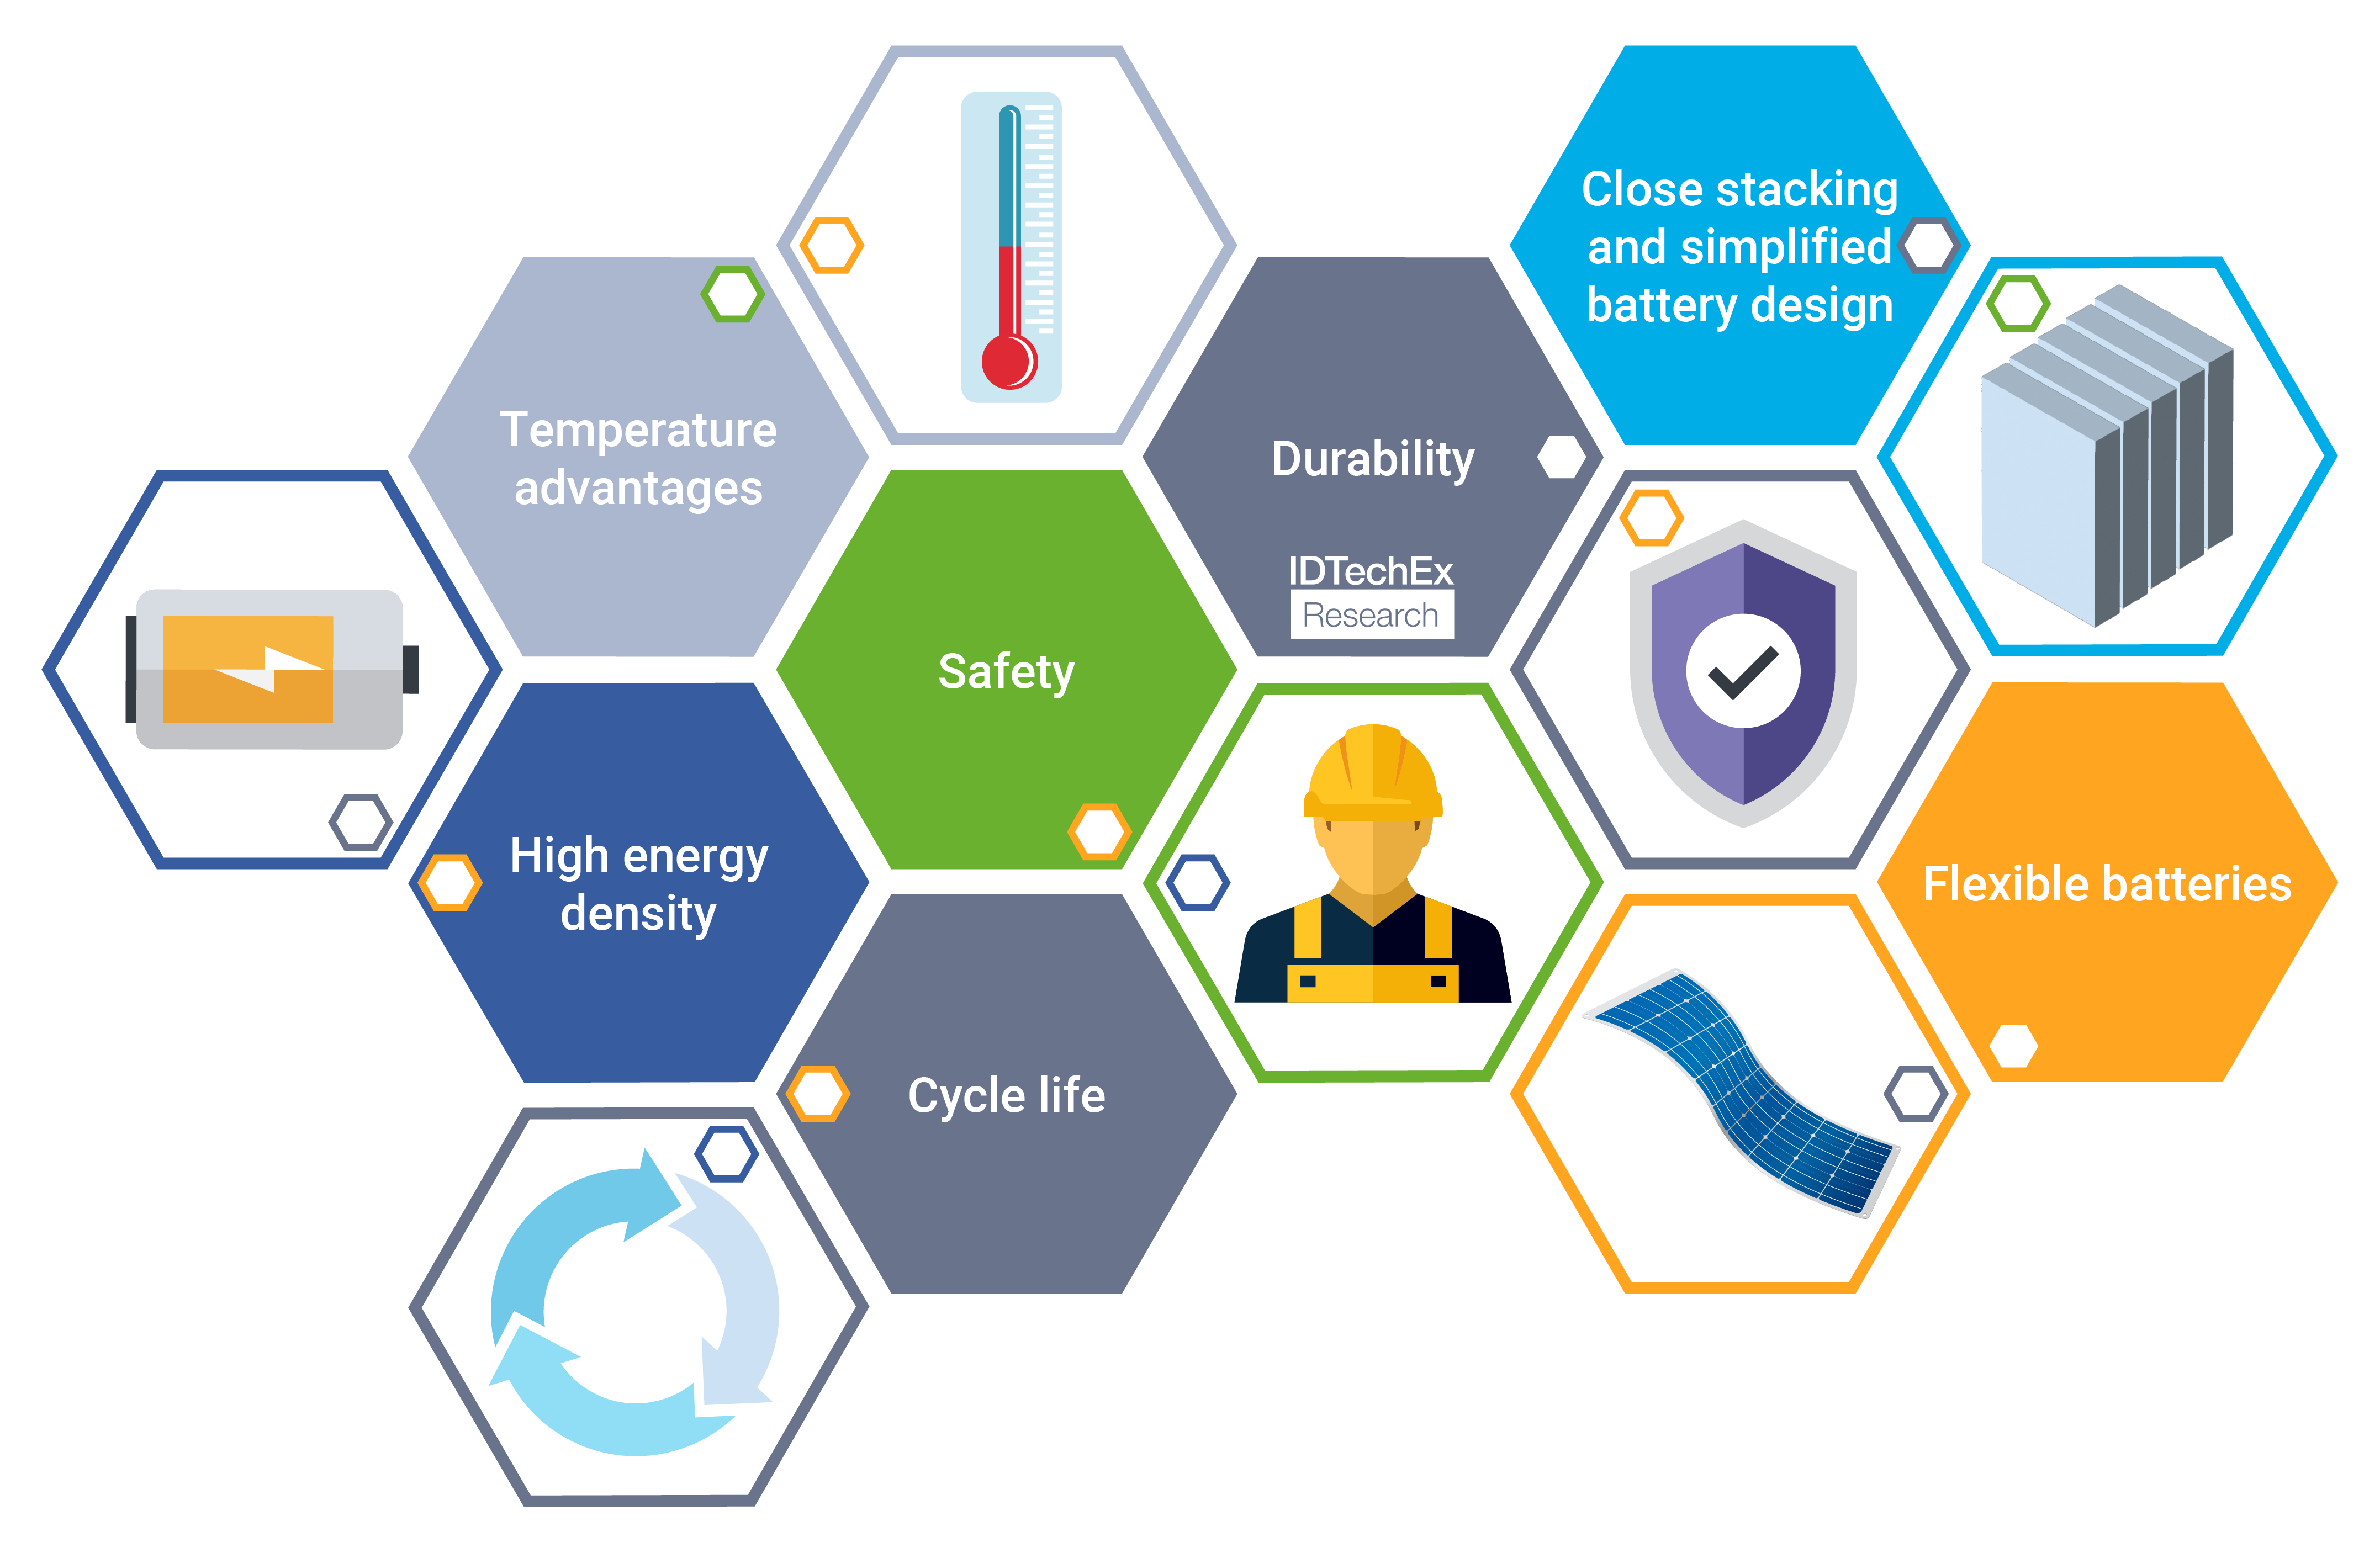 Value propositions offered by solid-state batteries. Source: IDTechEx